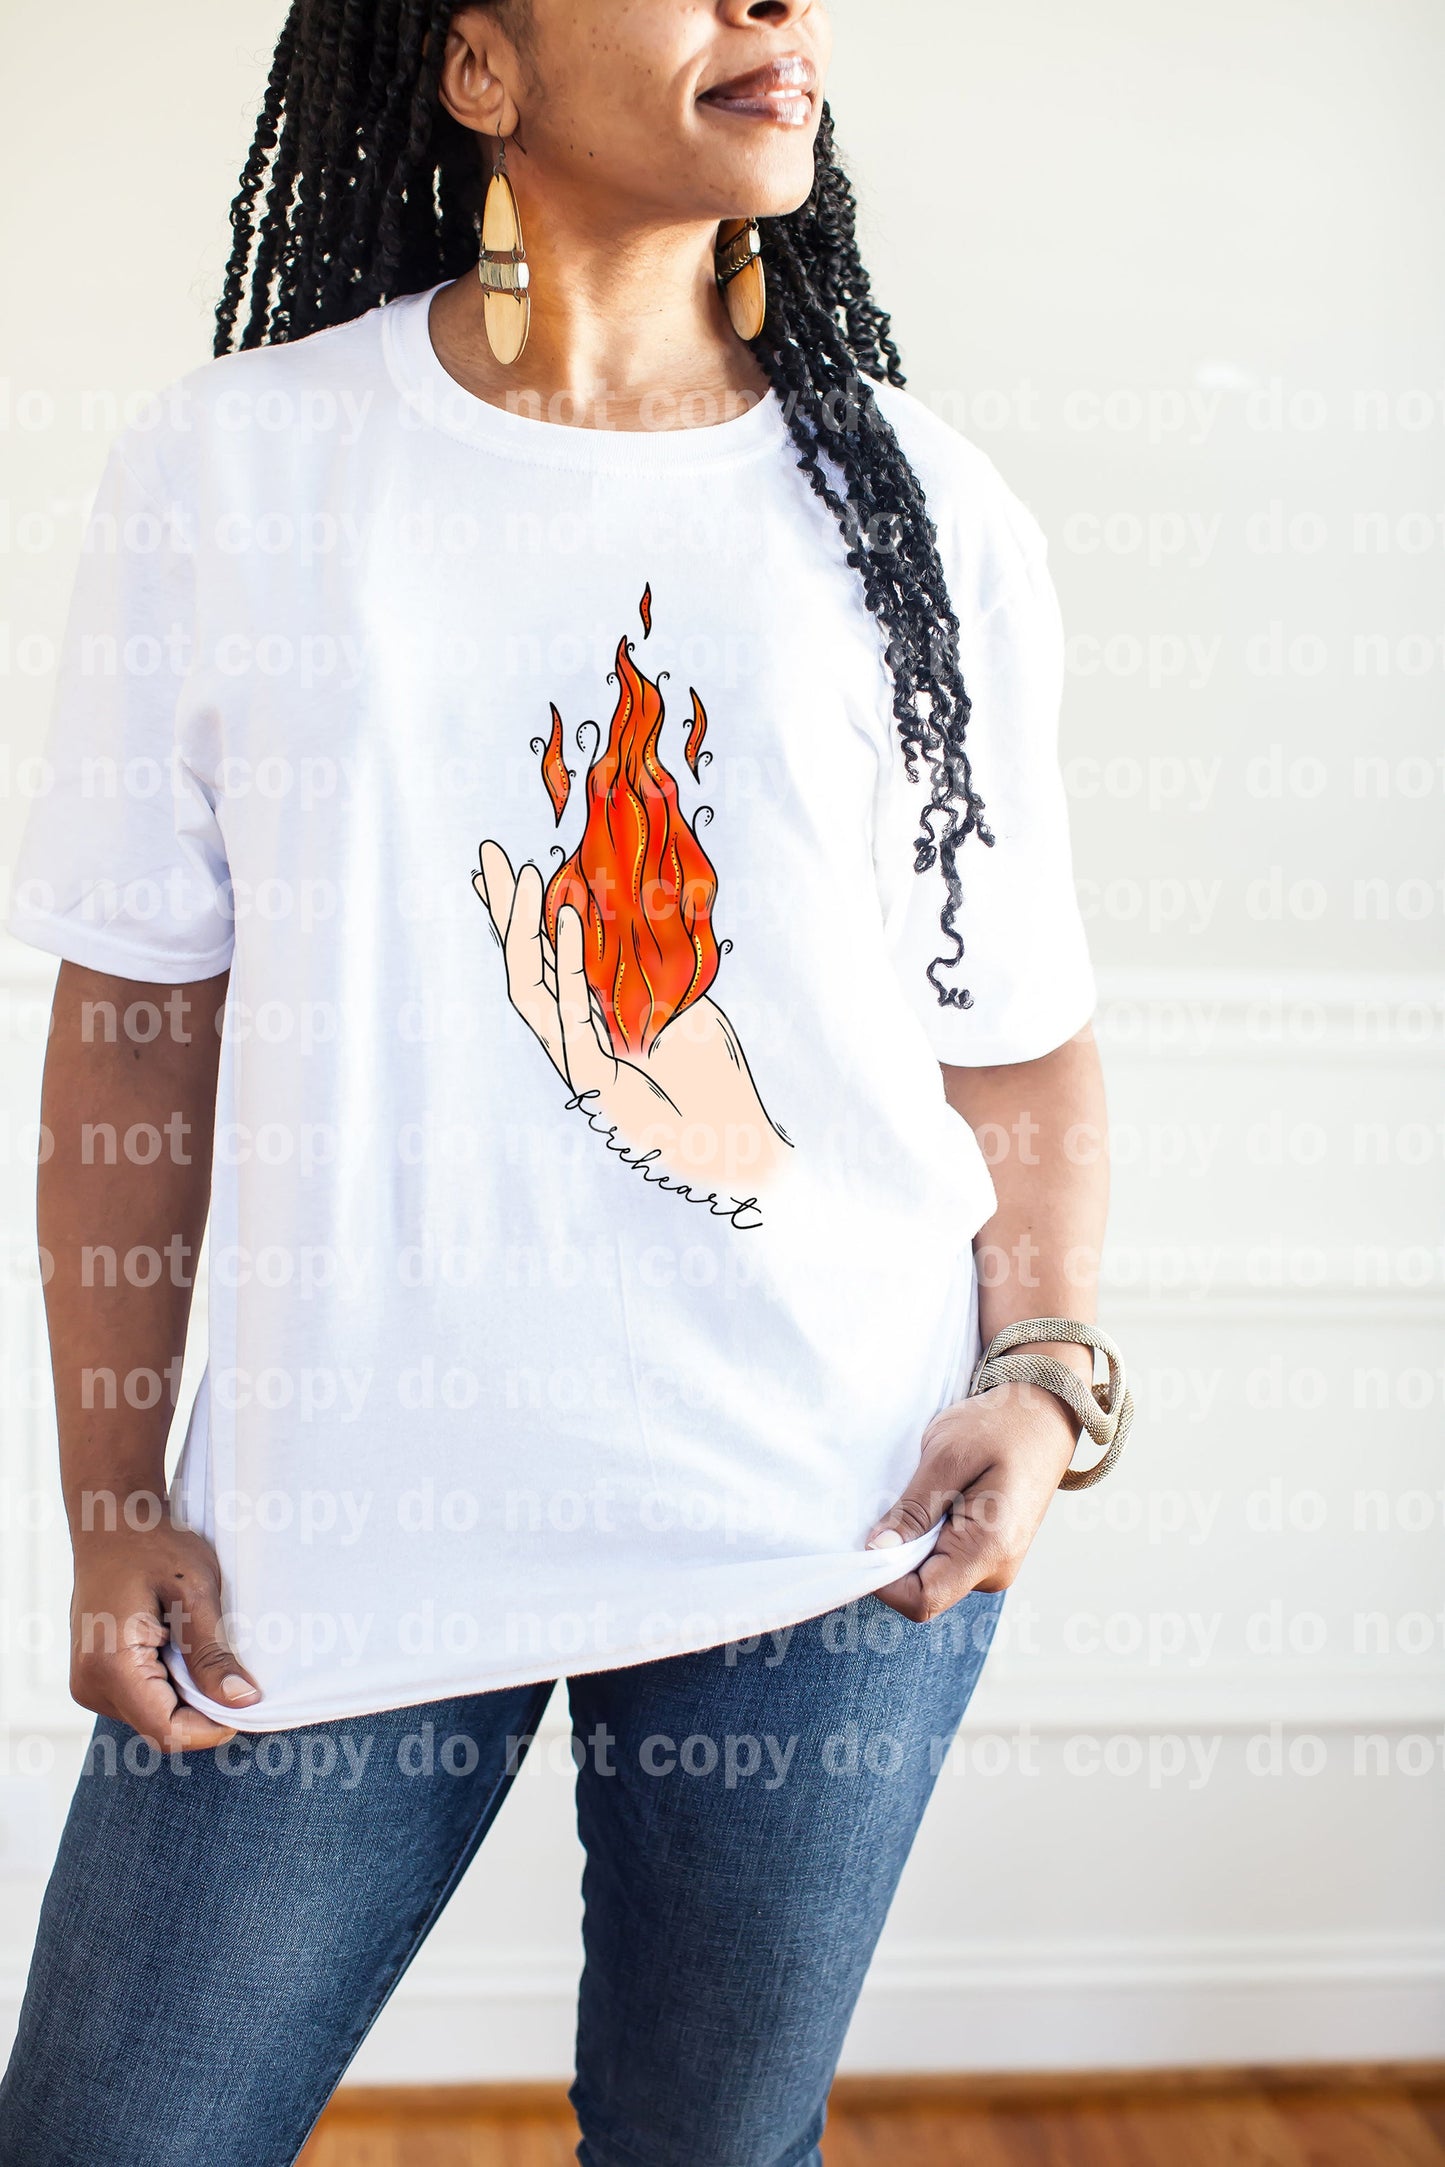 Fireheart Full Color/One Color Dream Print or Sublimation Print